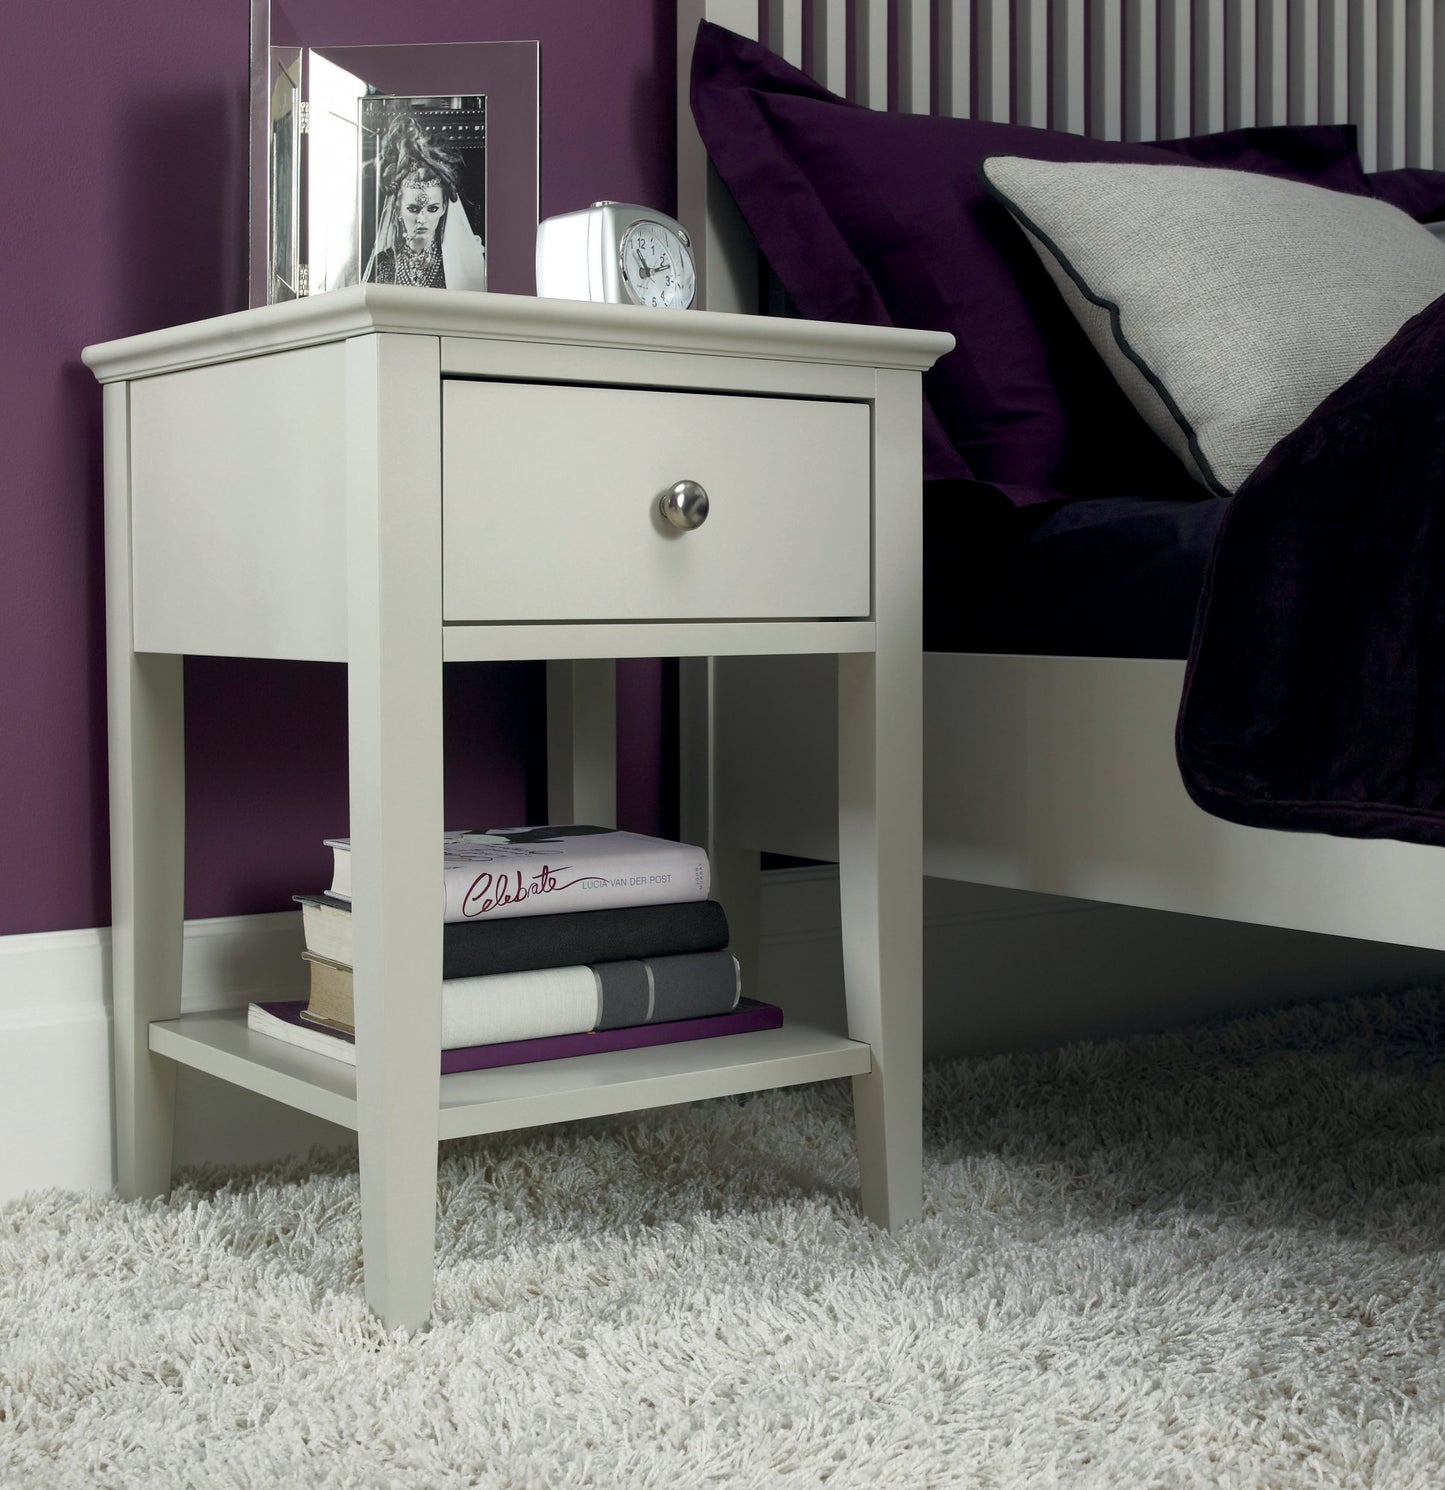 ASHBY COTTON 1 DRAWER NIGHTSTAND